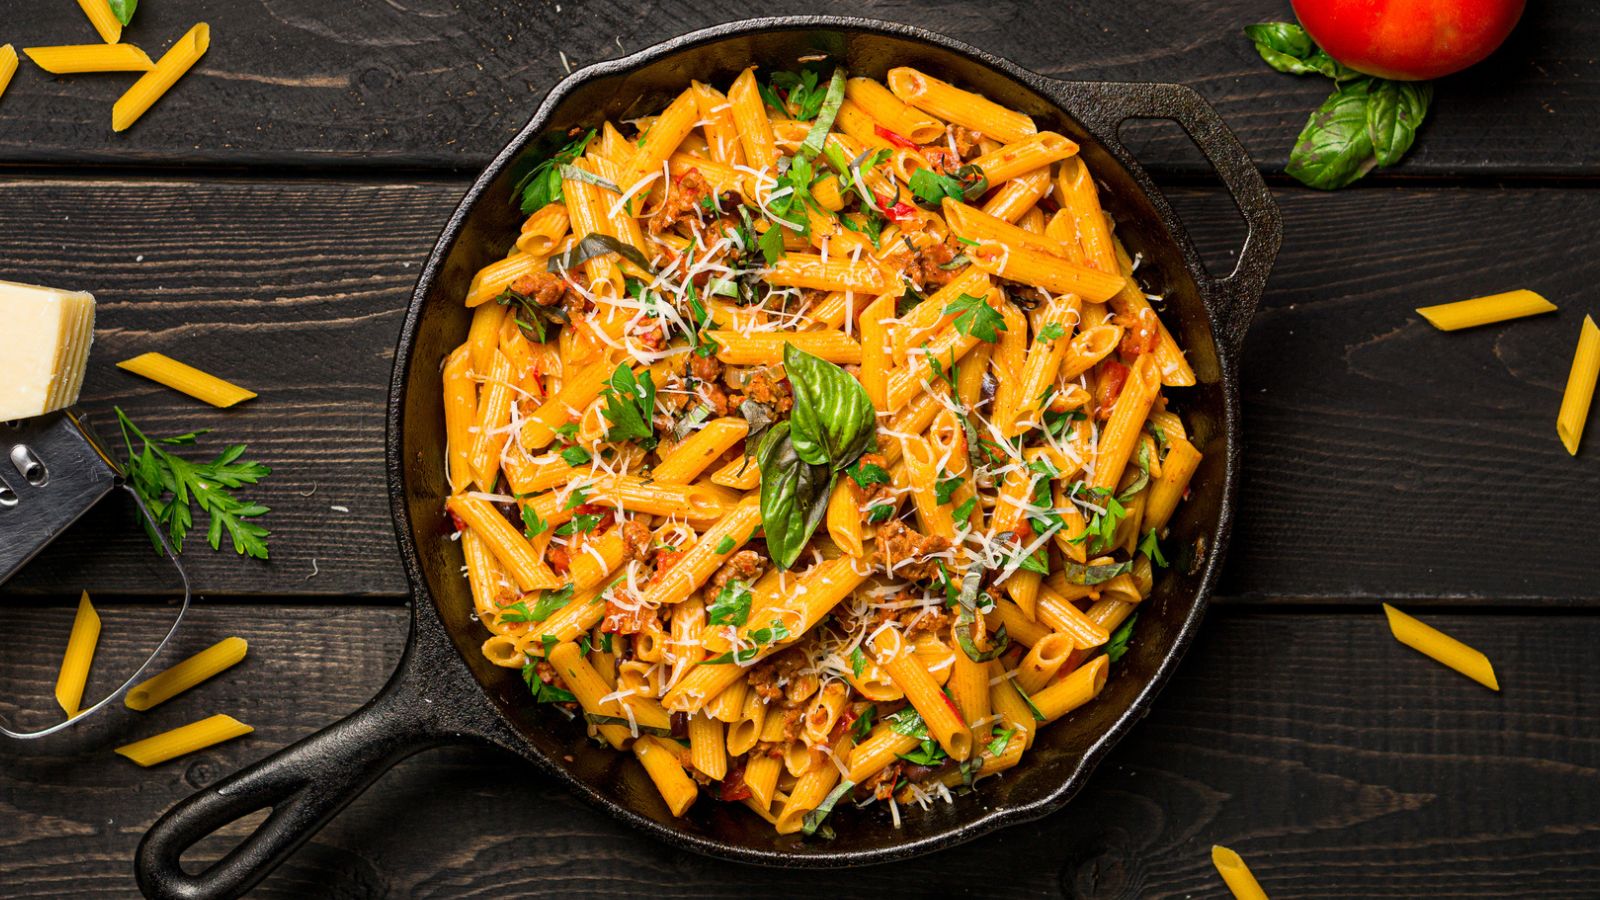 Whip Up These 20 Quick Pasta Lunches for Ultimate Enjoyment